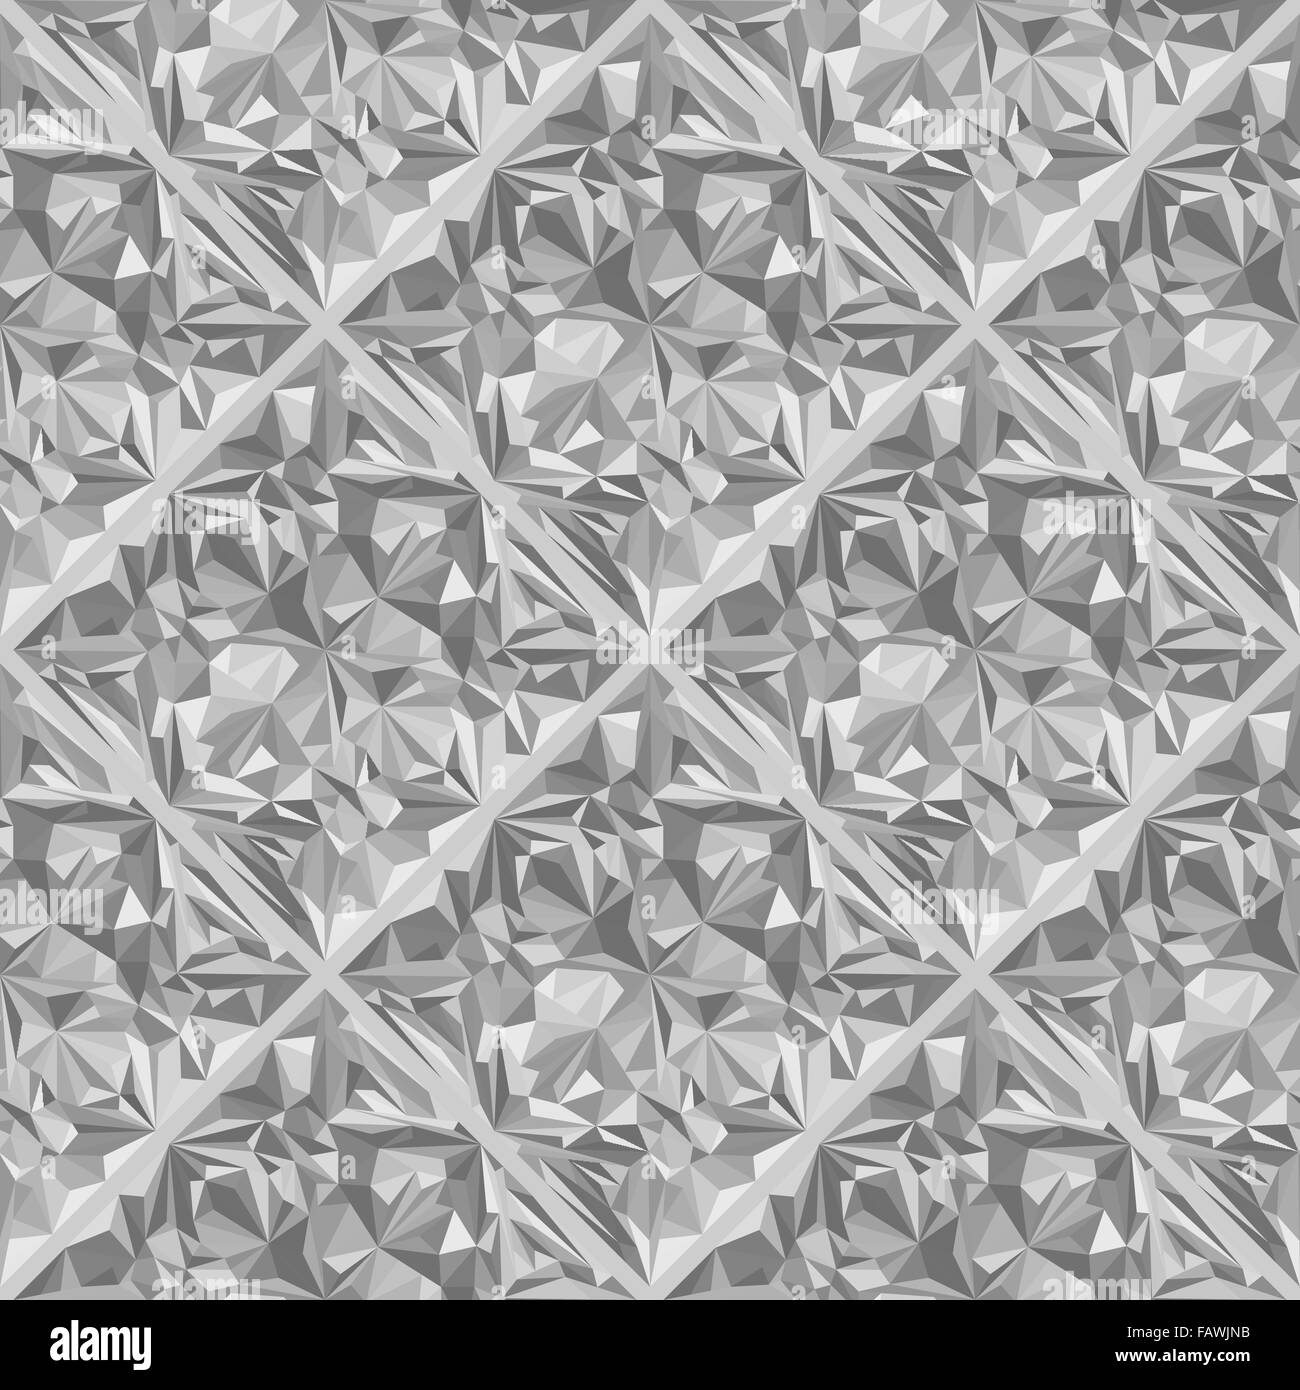 vector colorless gray halftones crystal jewel stone surface seamless pattern Stock Vector